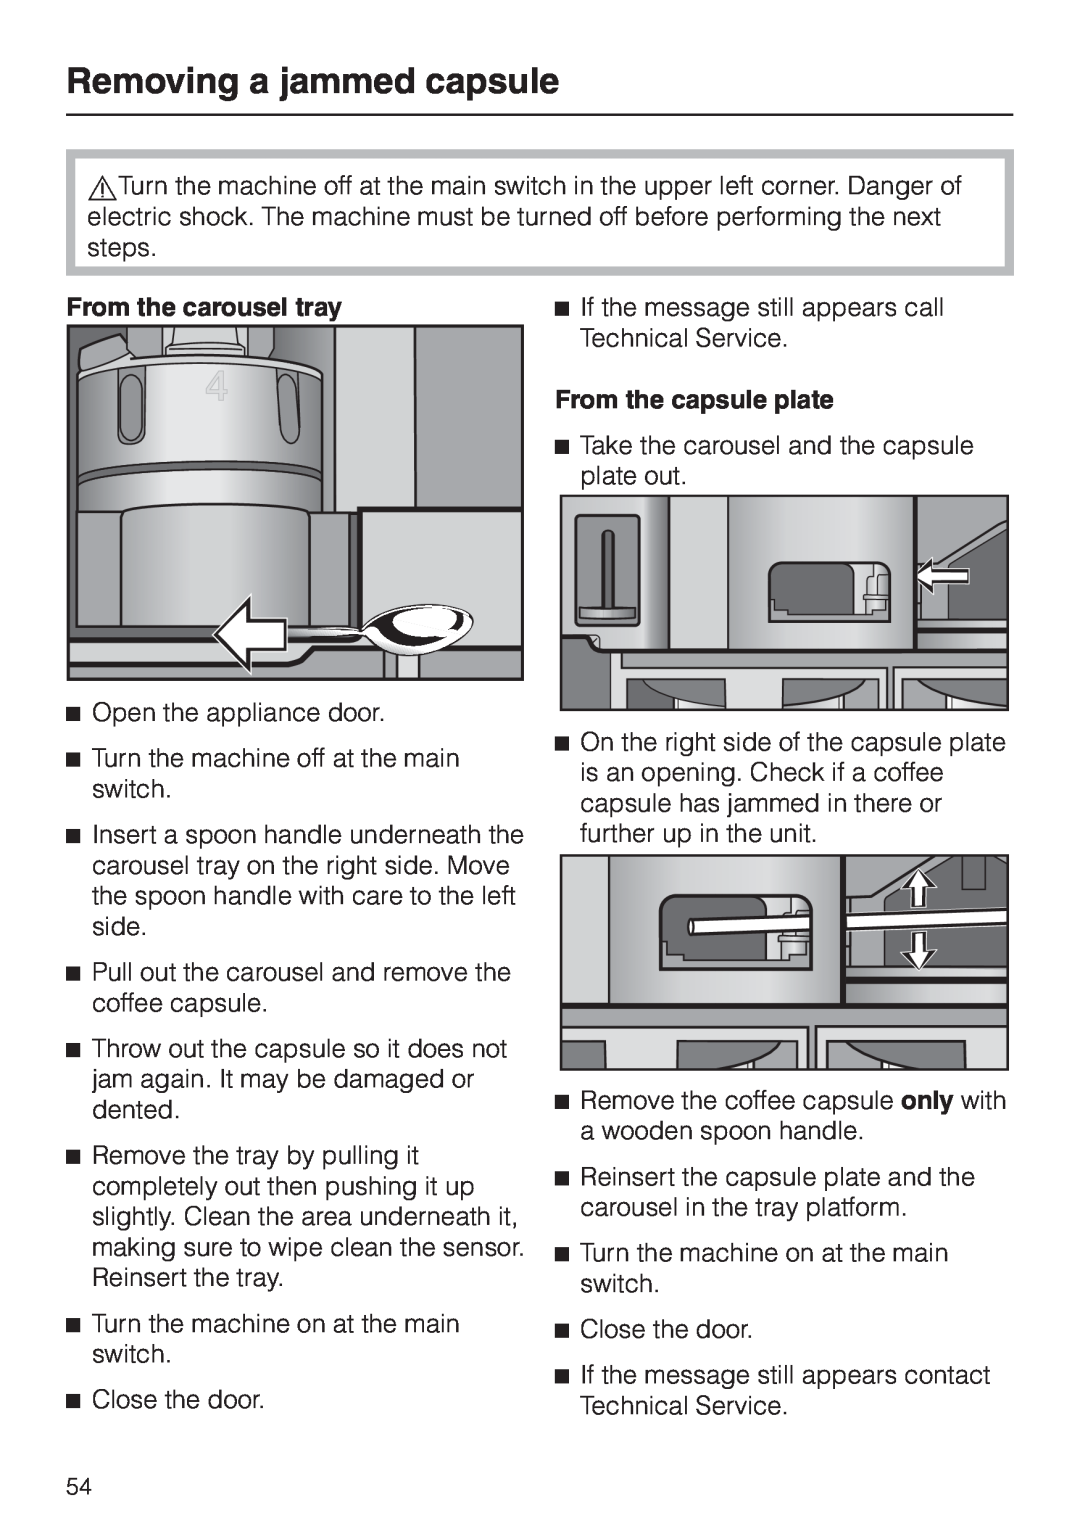 Miele CVA 2660 installation instructions Removing a jammed capsule, From the carousel tray, From the capsule plate 